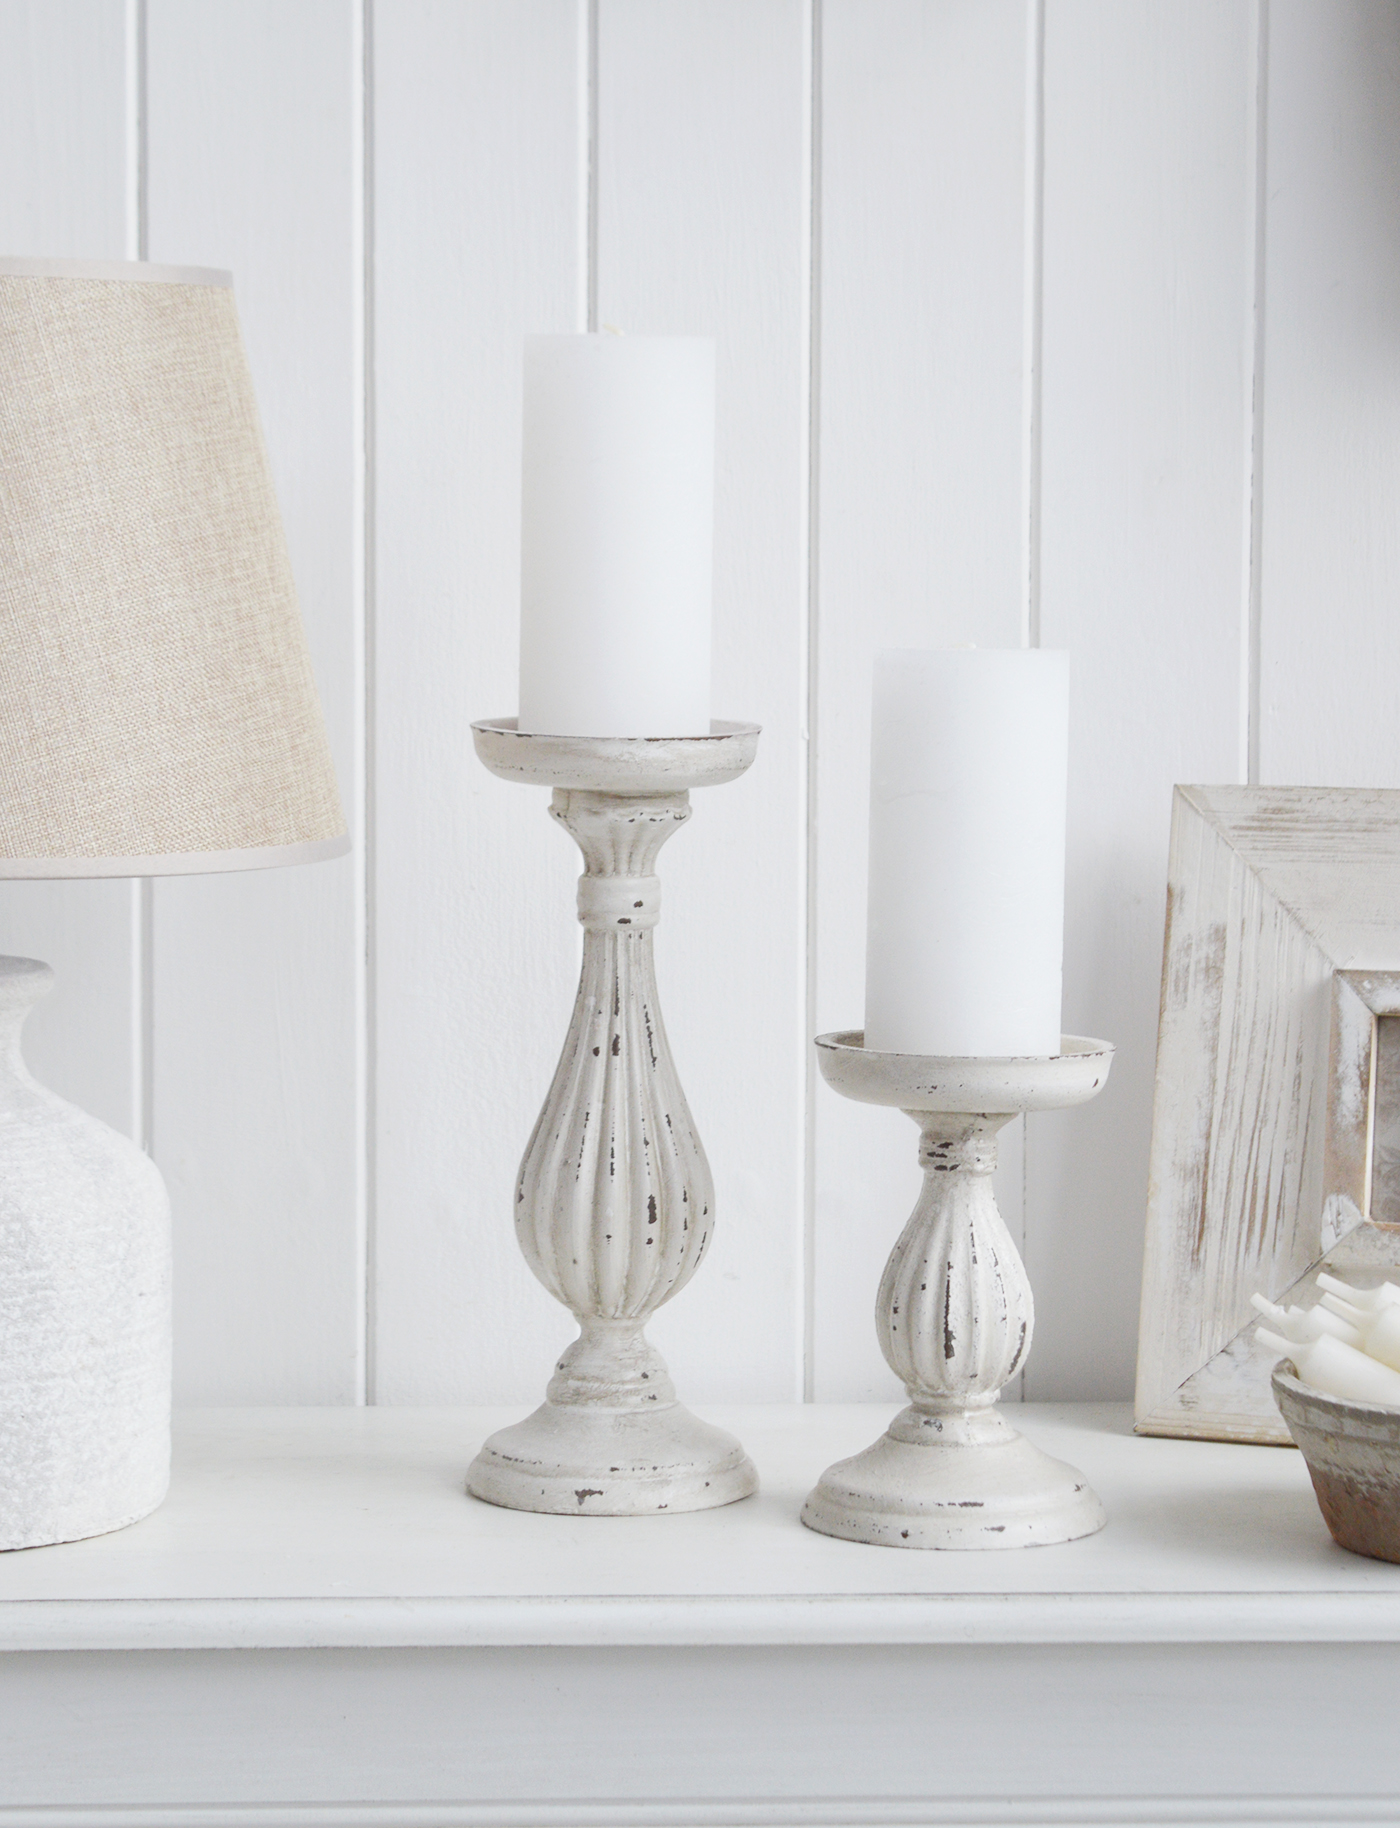 Antique White Pillar Candlesticks - The White Lighthouse New England Coastal Farmhouse and Country Home Furniture and Decor Accesories